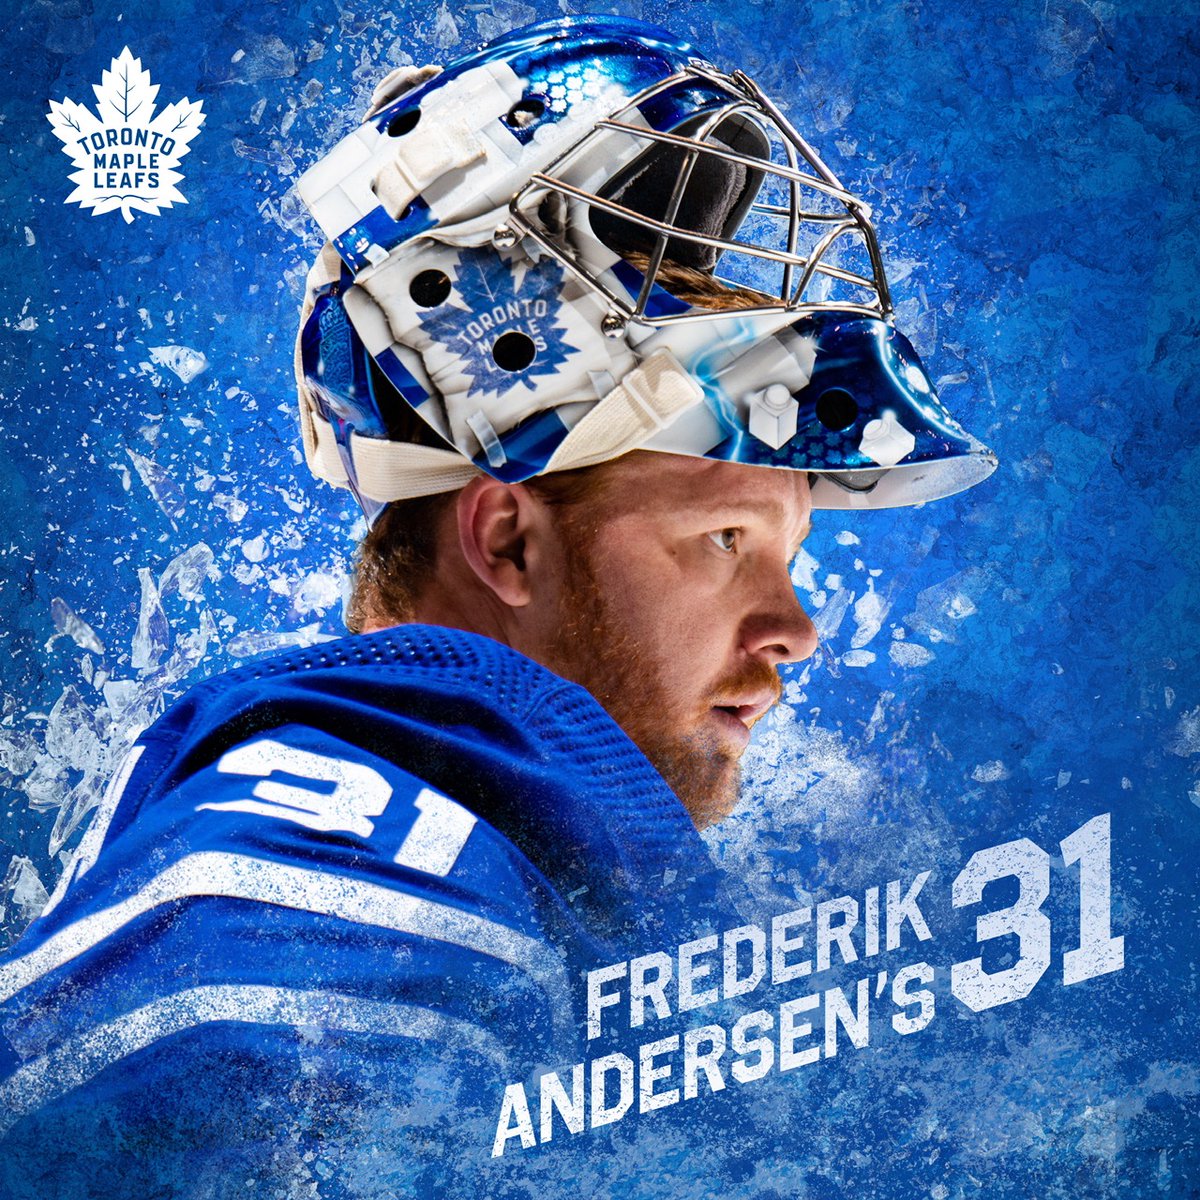 Excited about partnering up with Warner Music to share my playlist with you guys. You can listen to 31 of my favourite songs on my ‘31 Playlist’ that I’ll be refreshing monthly. Listen now on @applemusic or on the #Leafs app: FreddieAndersen.lnk.to/31TW #WarnerPartner